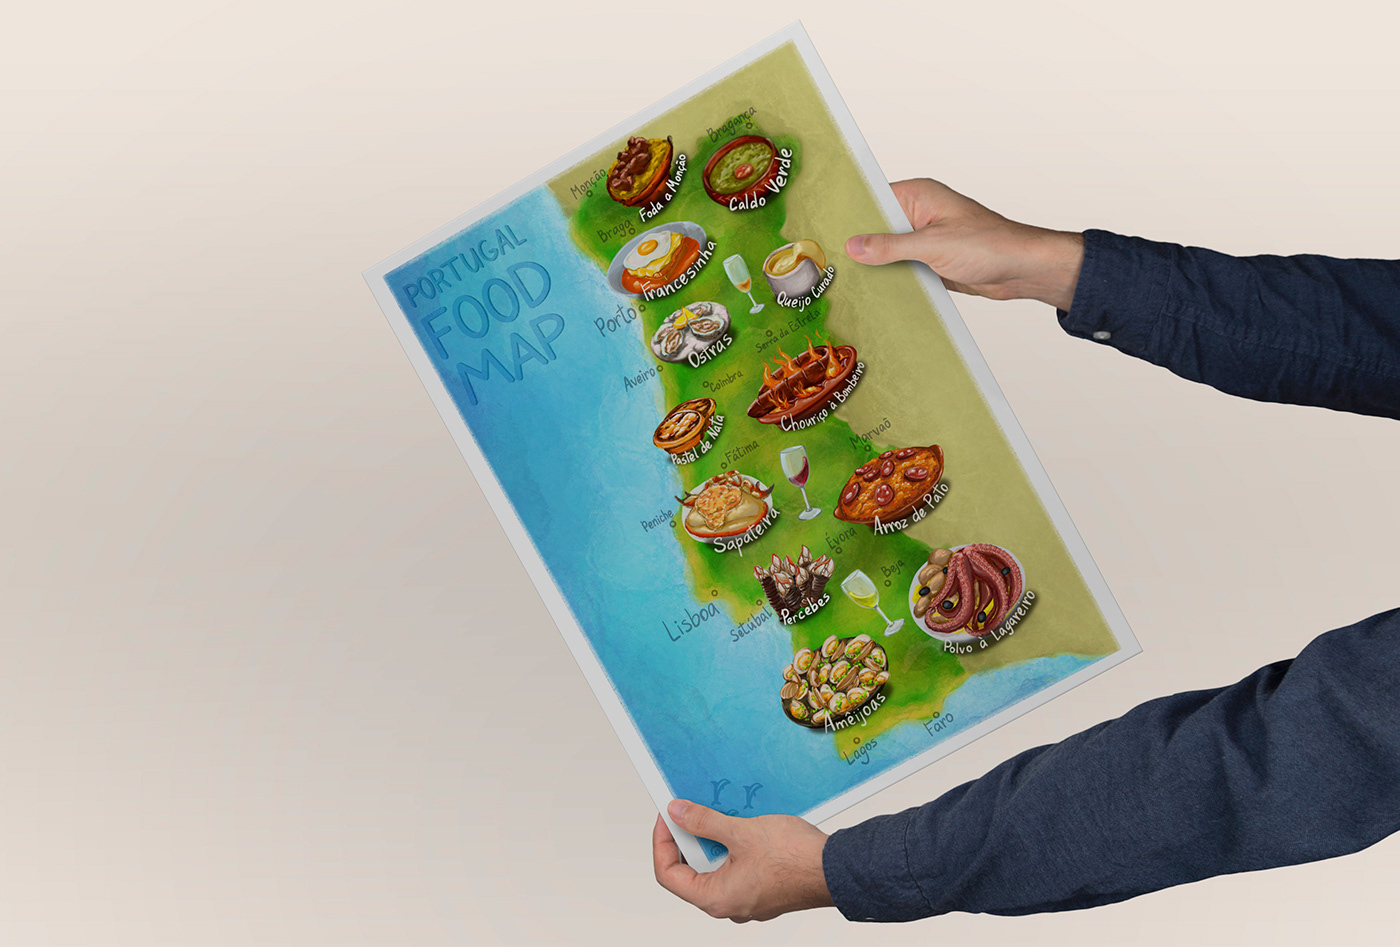 Hands holding Illustrated map of Portugal featuring national food